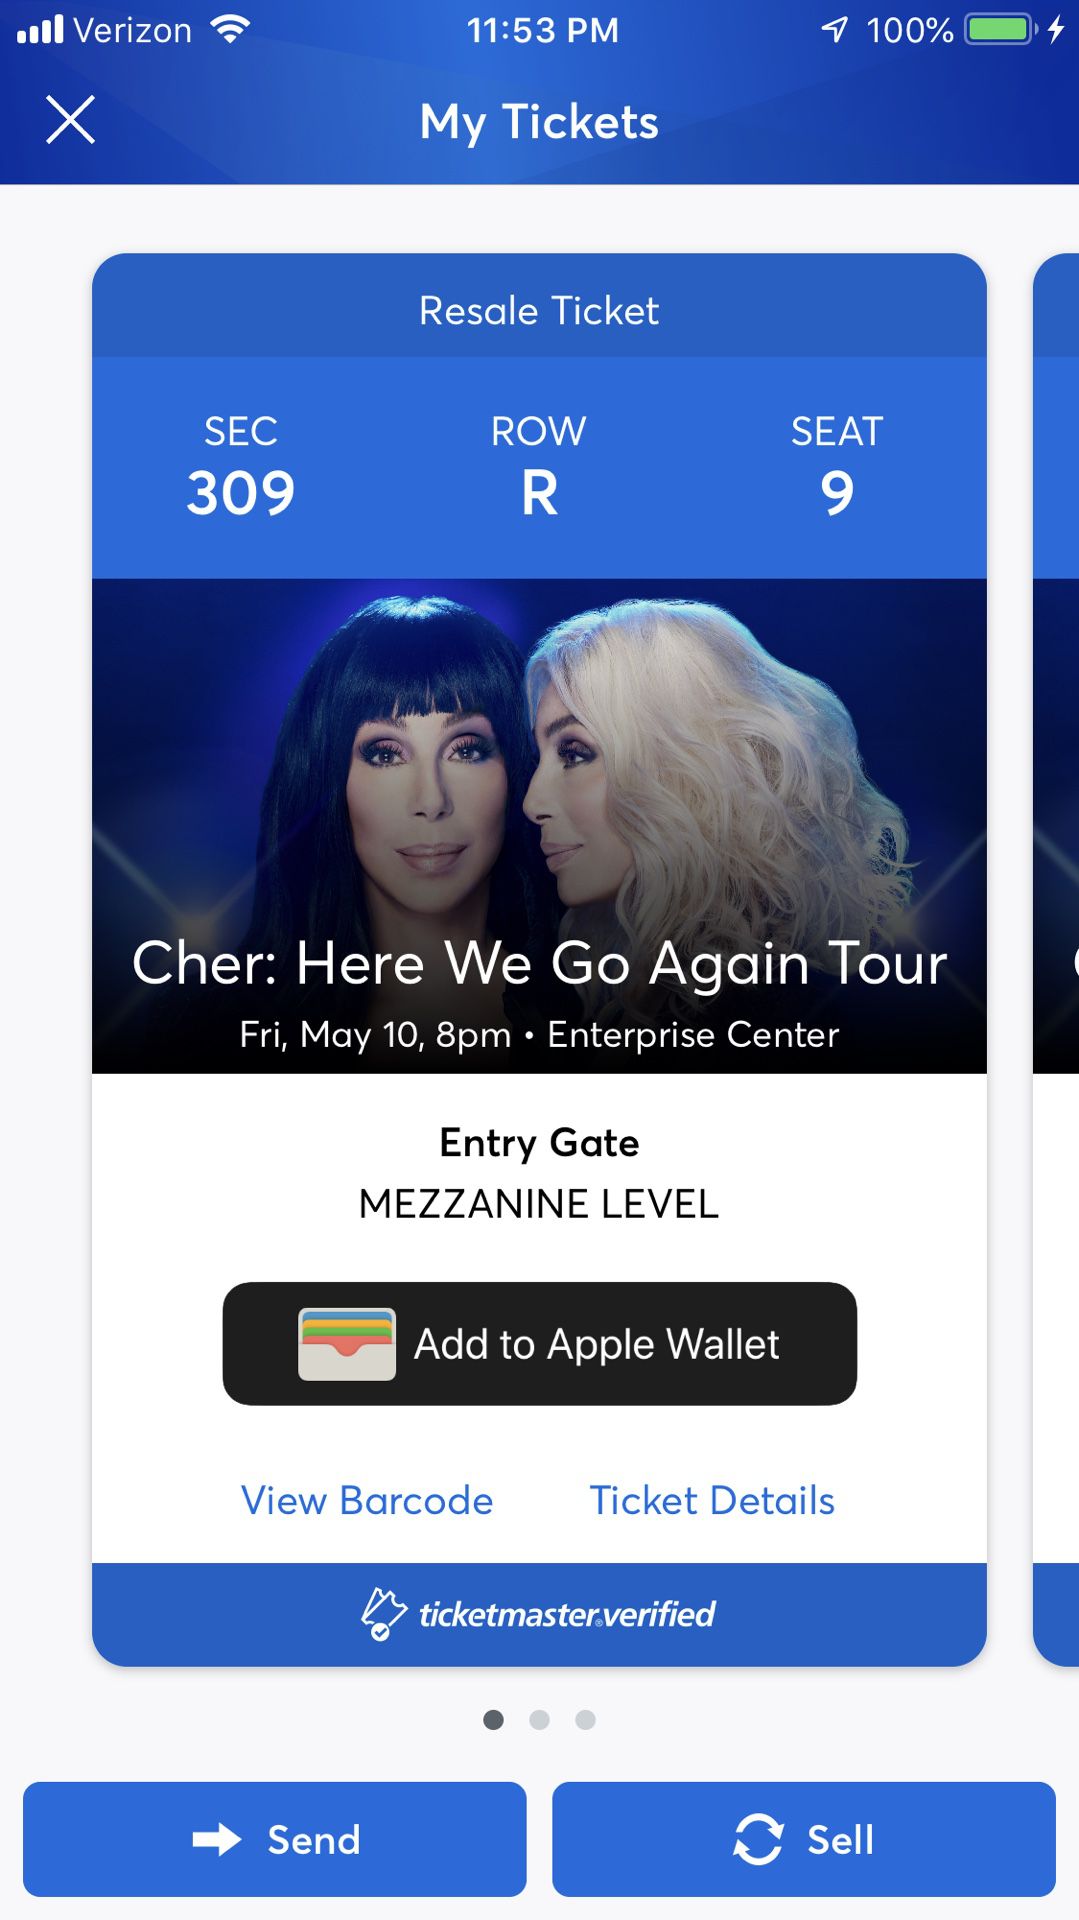 Cher tickets - St. Louis - Section 309, Row R, Seat 9,10,11 - $95 each